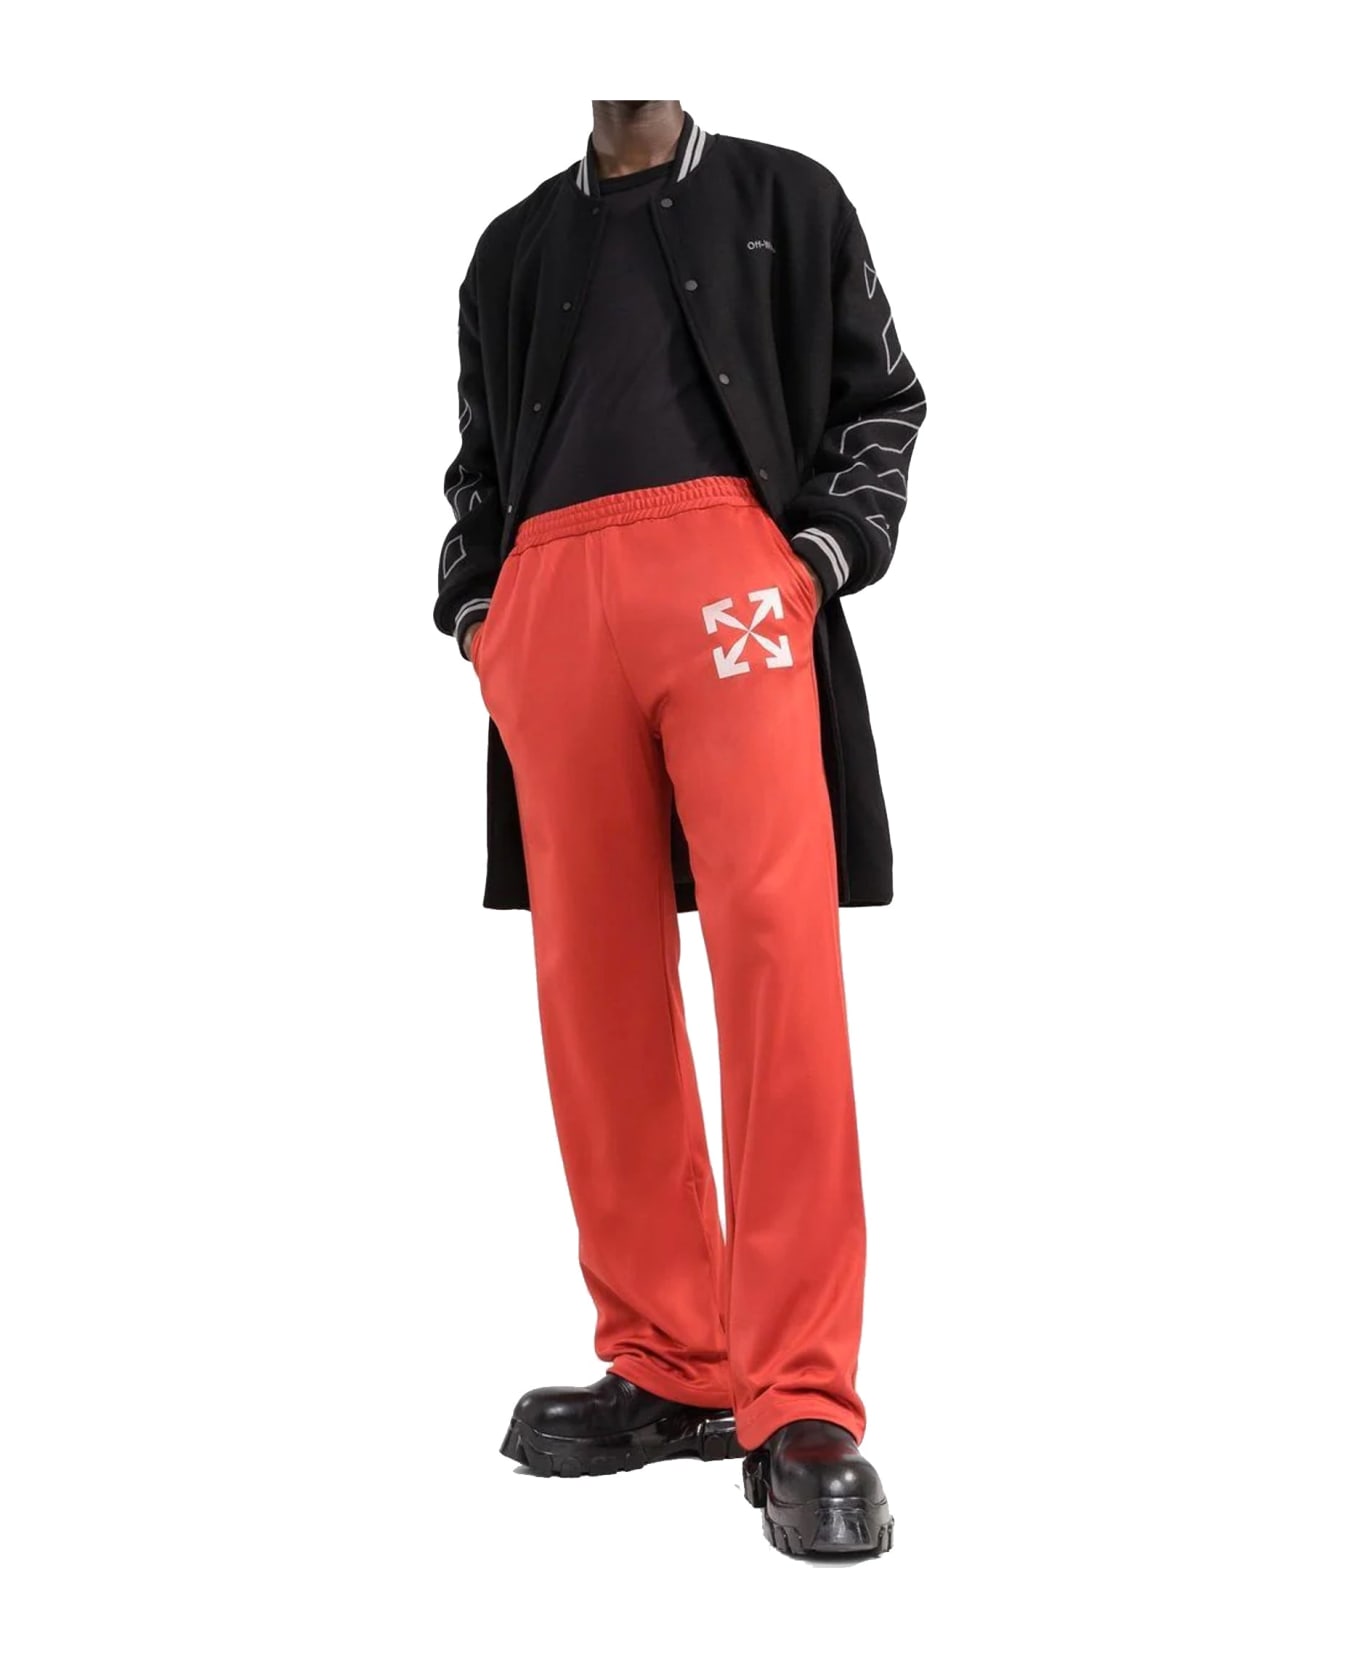 Off-White Slim Track Pants - Red ボトムス